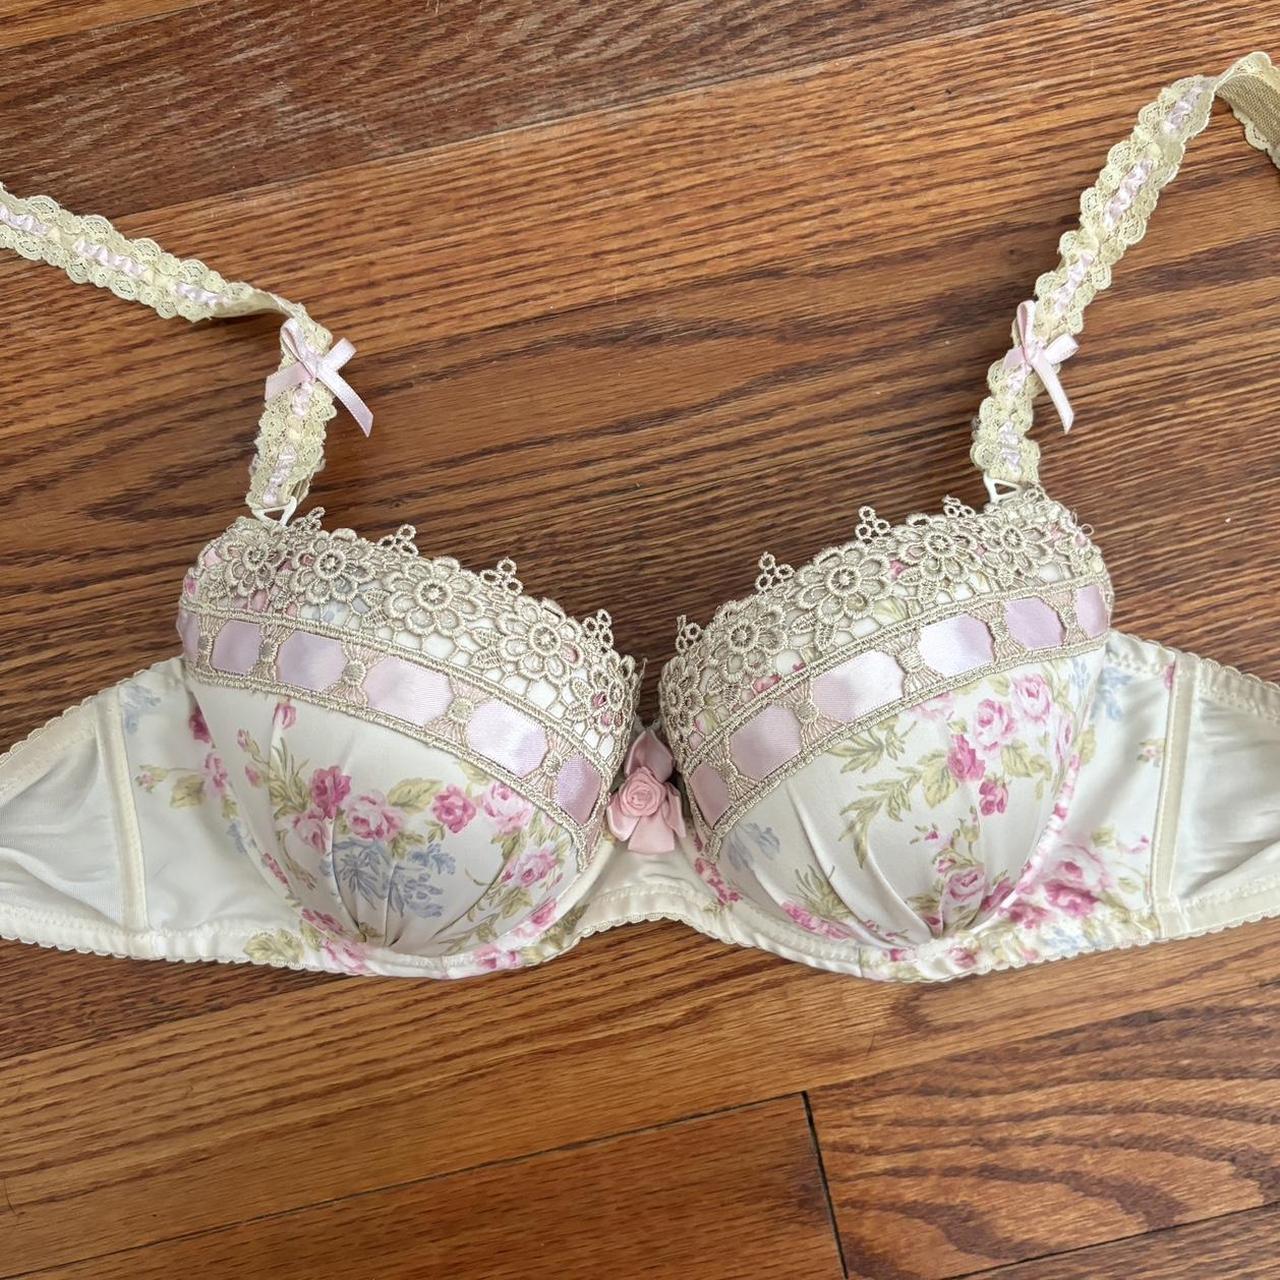 VS LUXE LINGERIE Strappy Demi Bra. Brand new with - Depop